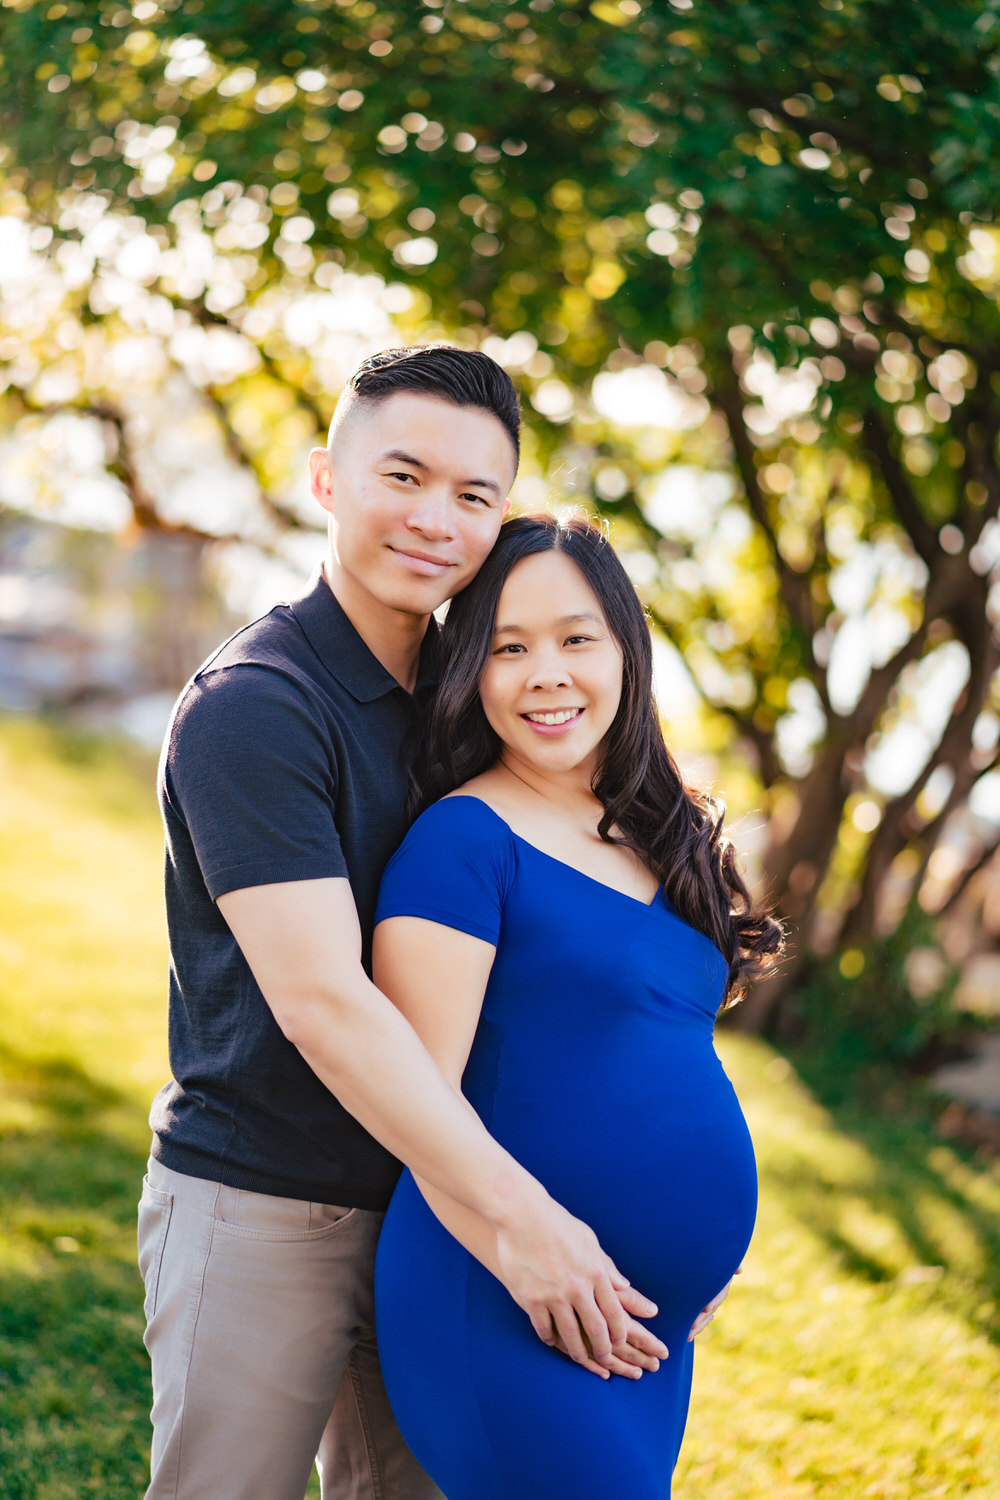 35 Maternity Poses Every Mom-To-Be Needs At Photoshoot | Maternity  photography couples, Maternity photography studio, Maternity photography poses  pregnancy pics